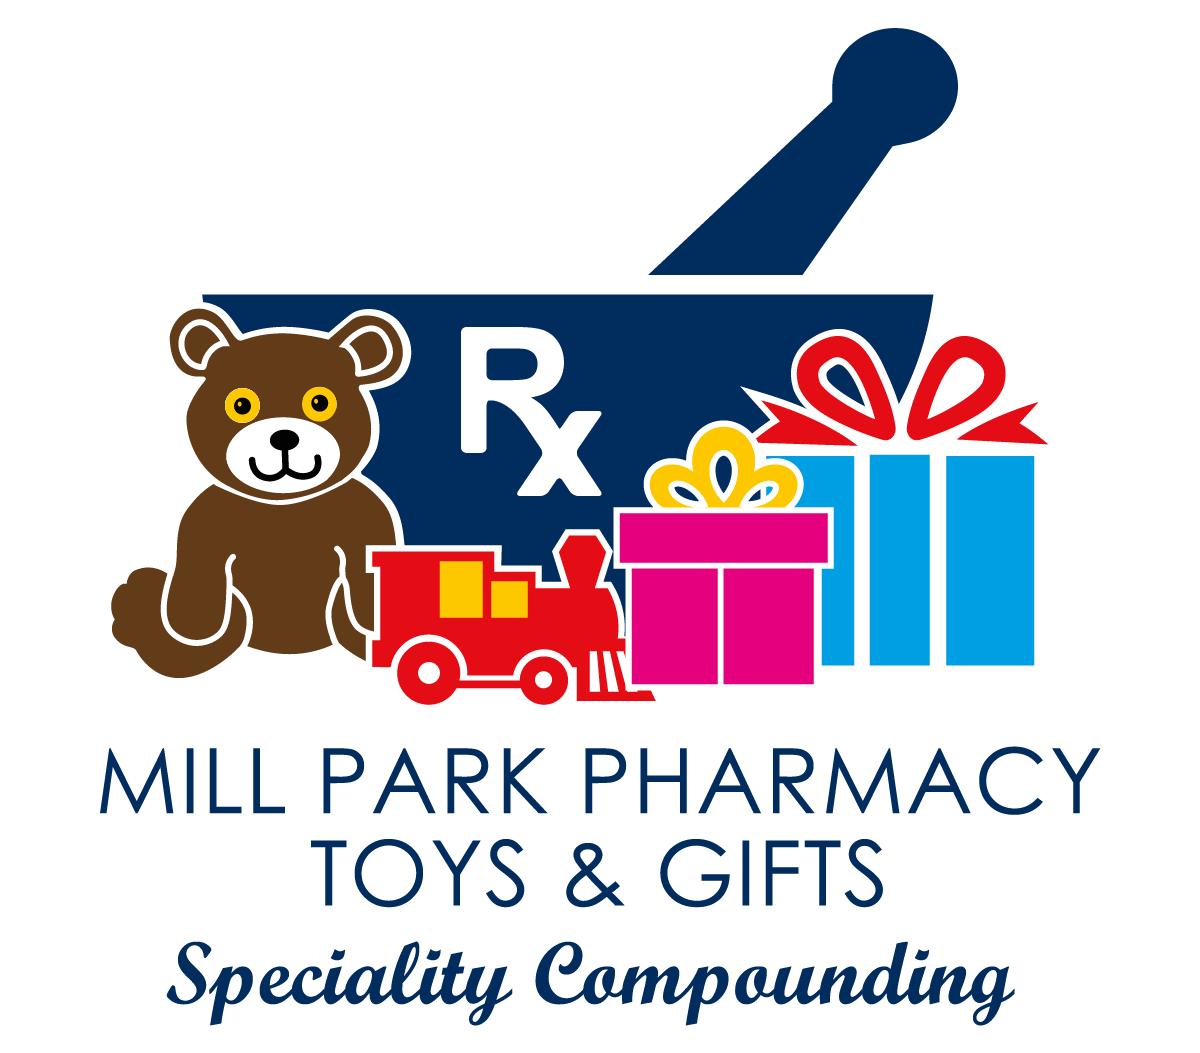 Pharmacy clipart refill. Compounding services mill park